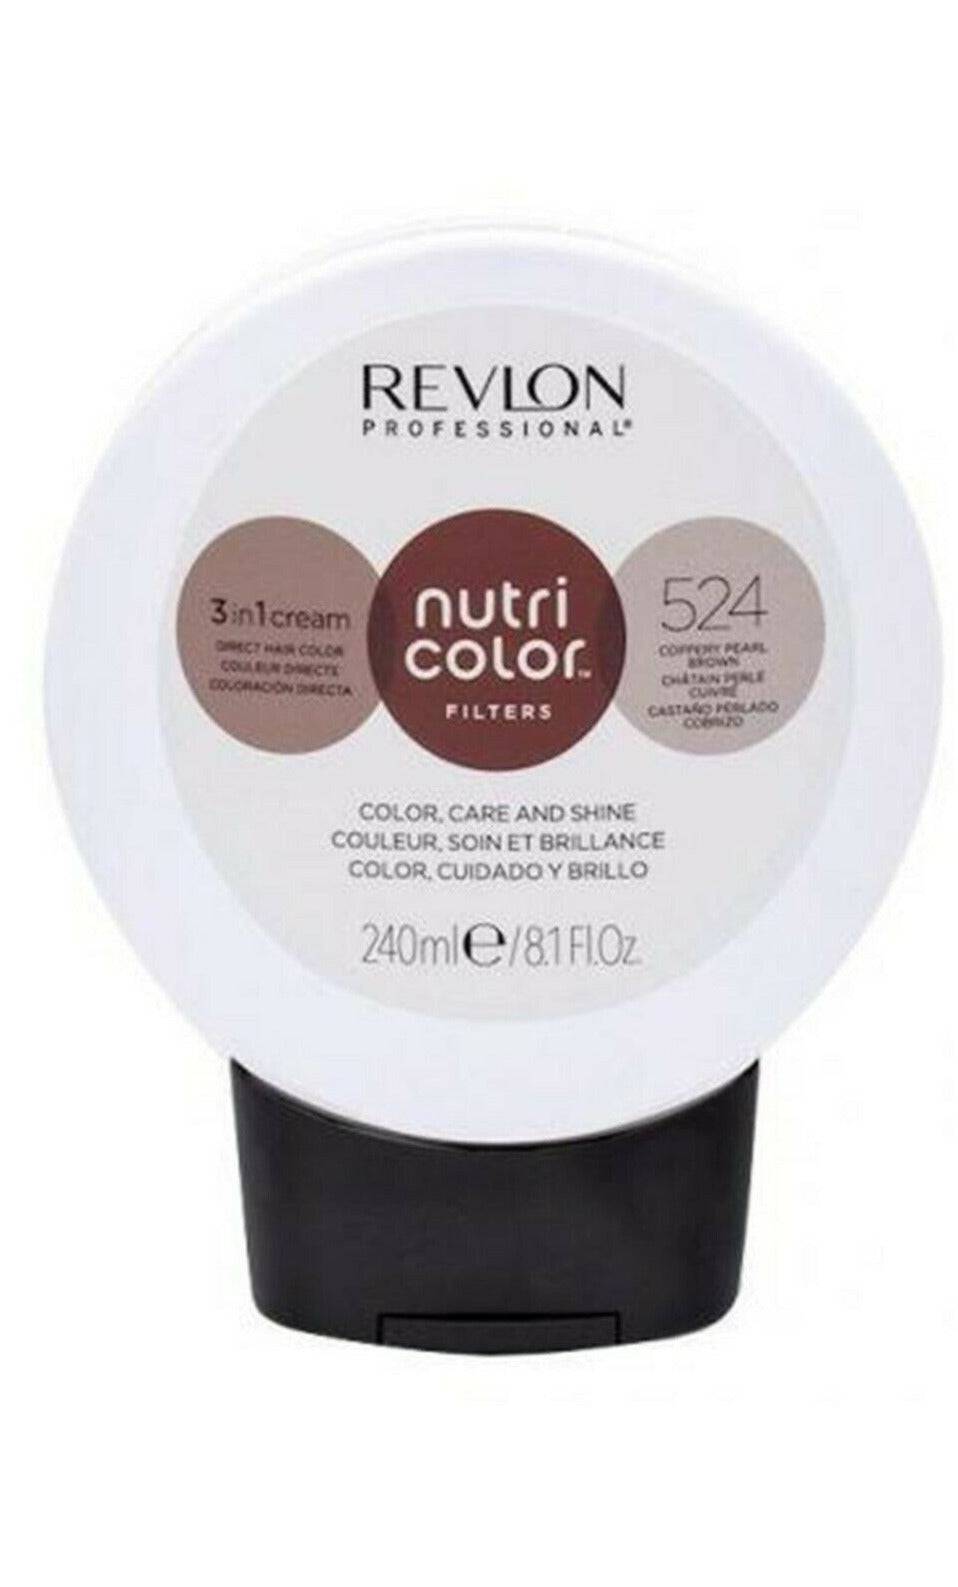 Revlon Professional Nutri Color Creme 3 in 1 Cream #524 Copperboy Pearl  240ml - On Line Hair Depot